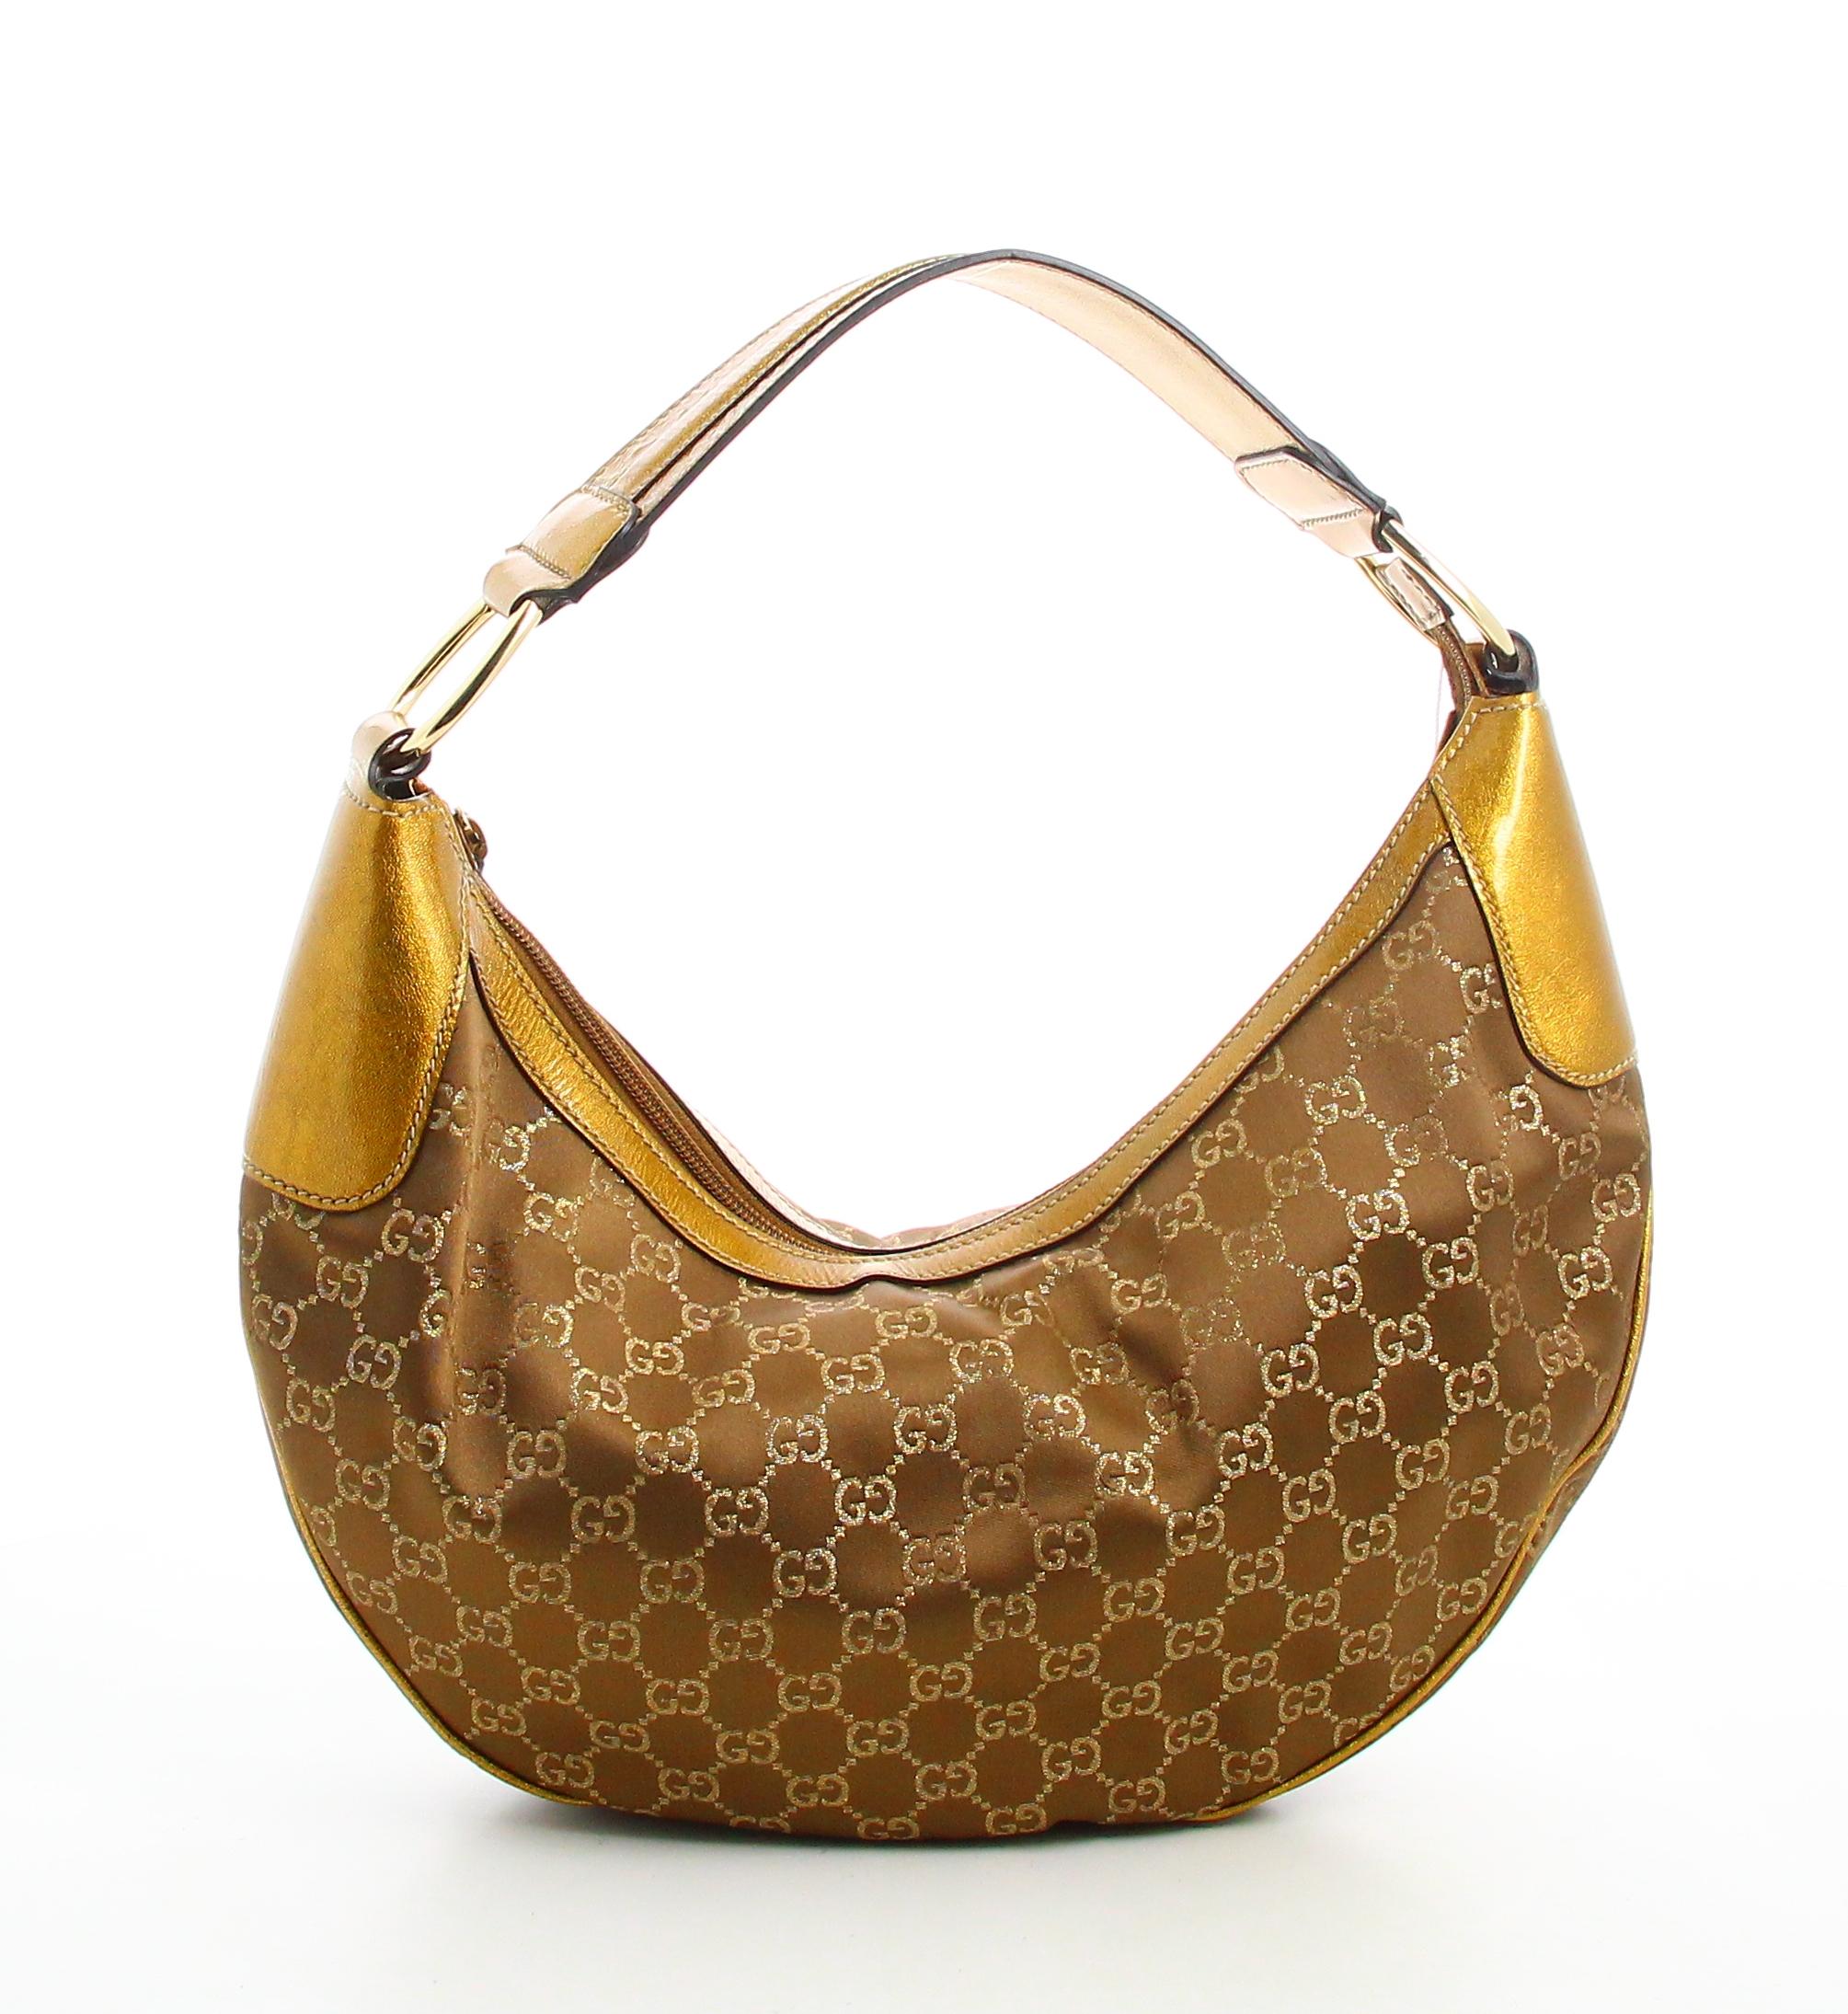 Gucci Lurex Golden Monogram Handbag 

- Very good condition. Shows very slight signs of wear over time. 
- Gucci Handbag 
- Colour : Golden 
- Lurex golden monogram 
- Golden recouvent leather strap 
- Clasp : Zip
- Inside: Monogram lining plus